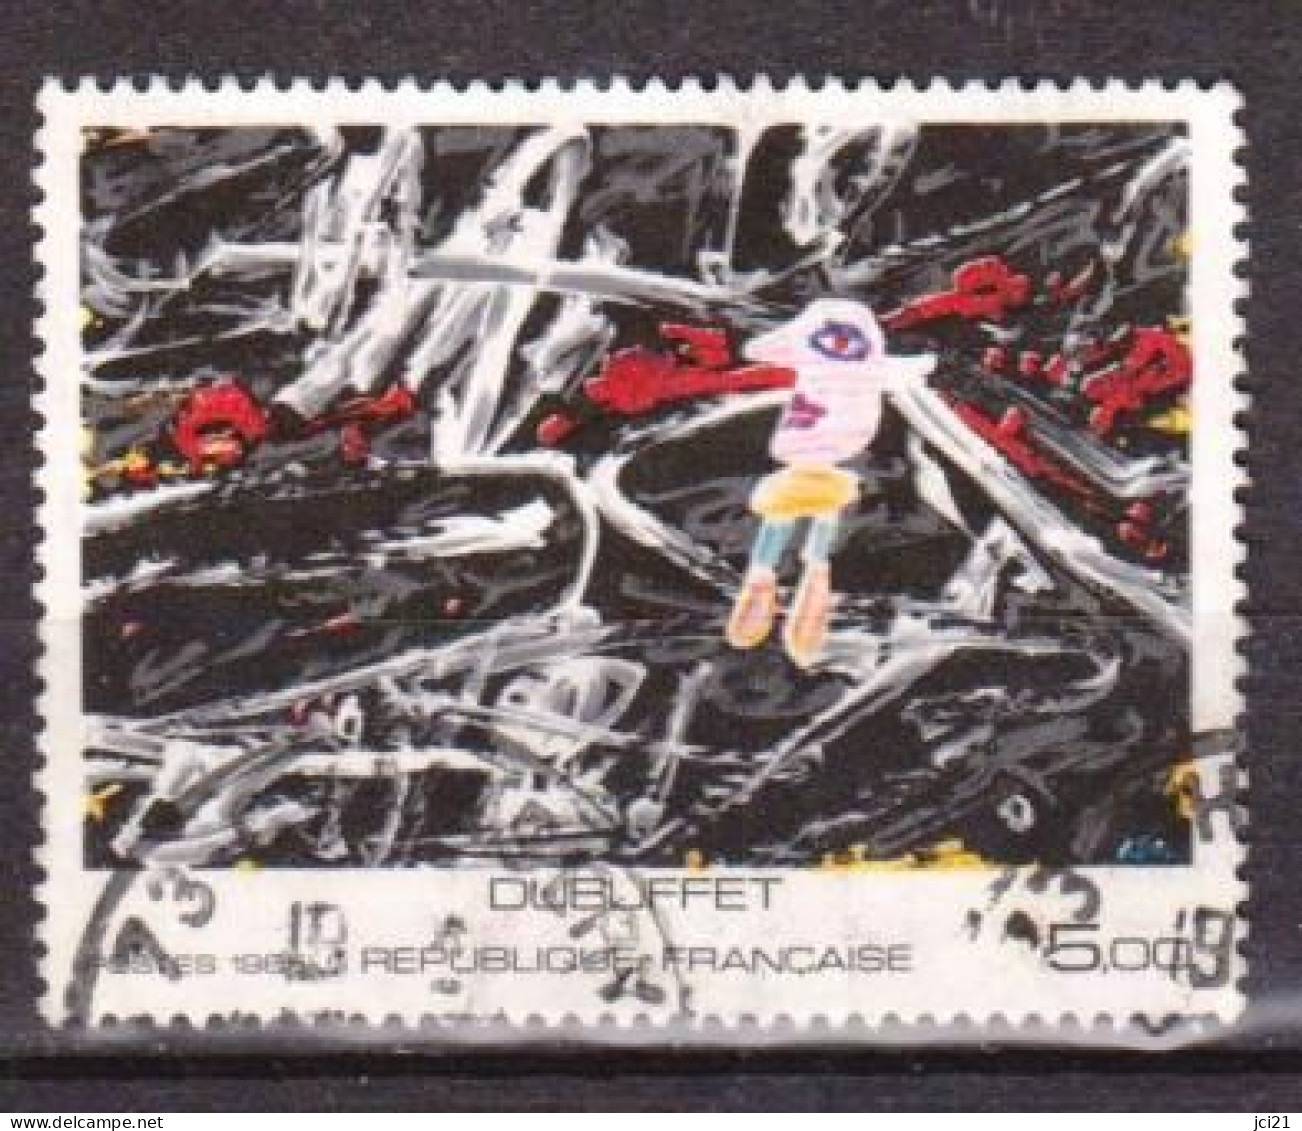 Timbre Y&T 2385 - 1985 "DUBUFFFET" OBLITÉRÉ (1407)_Ti326 - Used Stamps